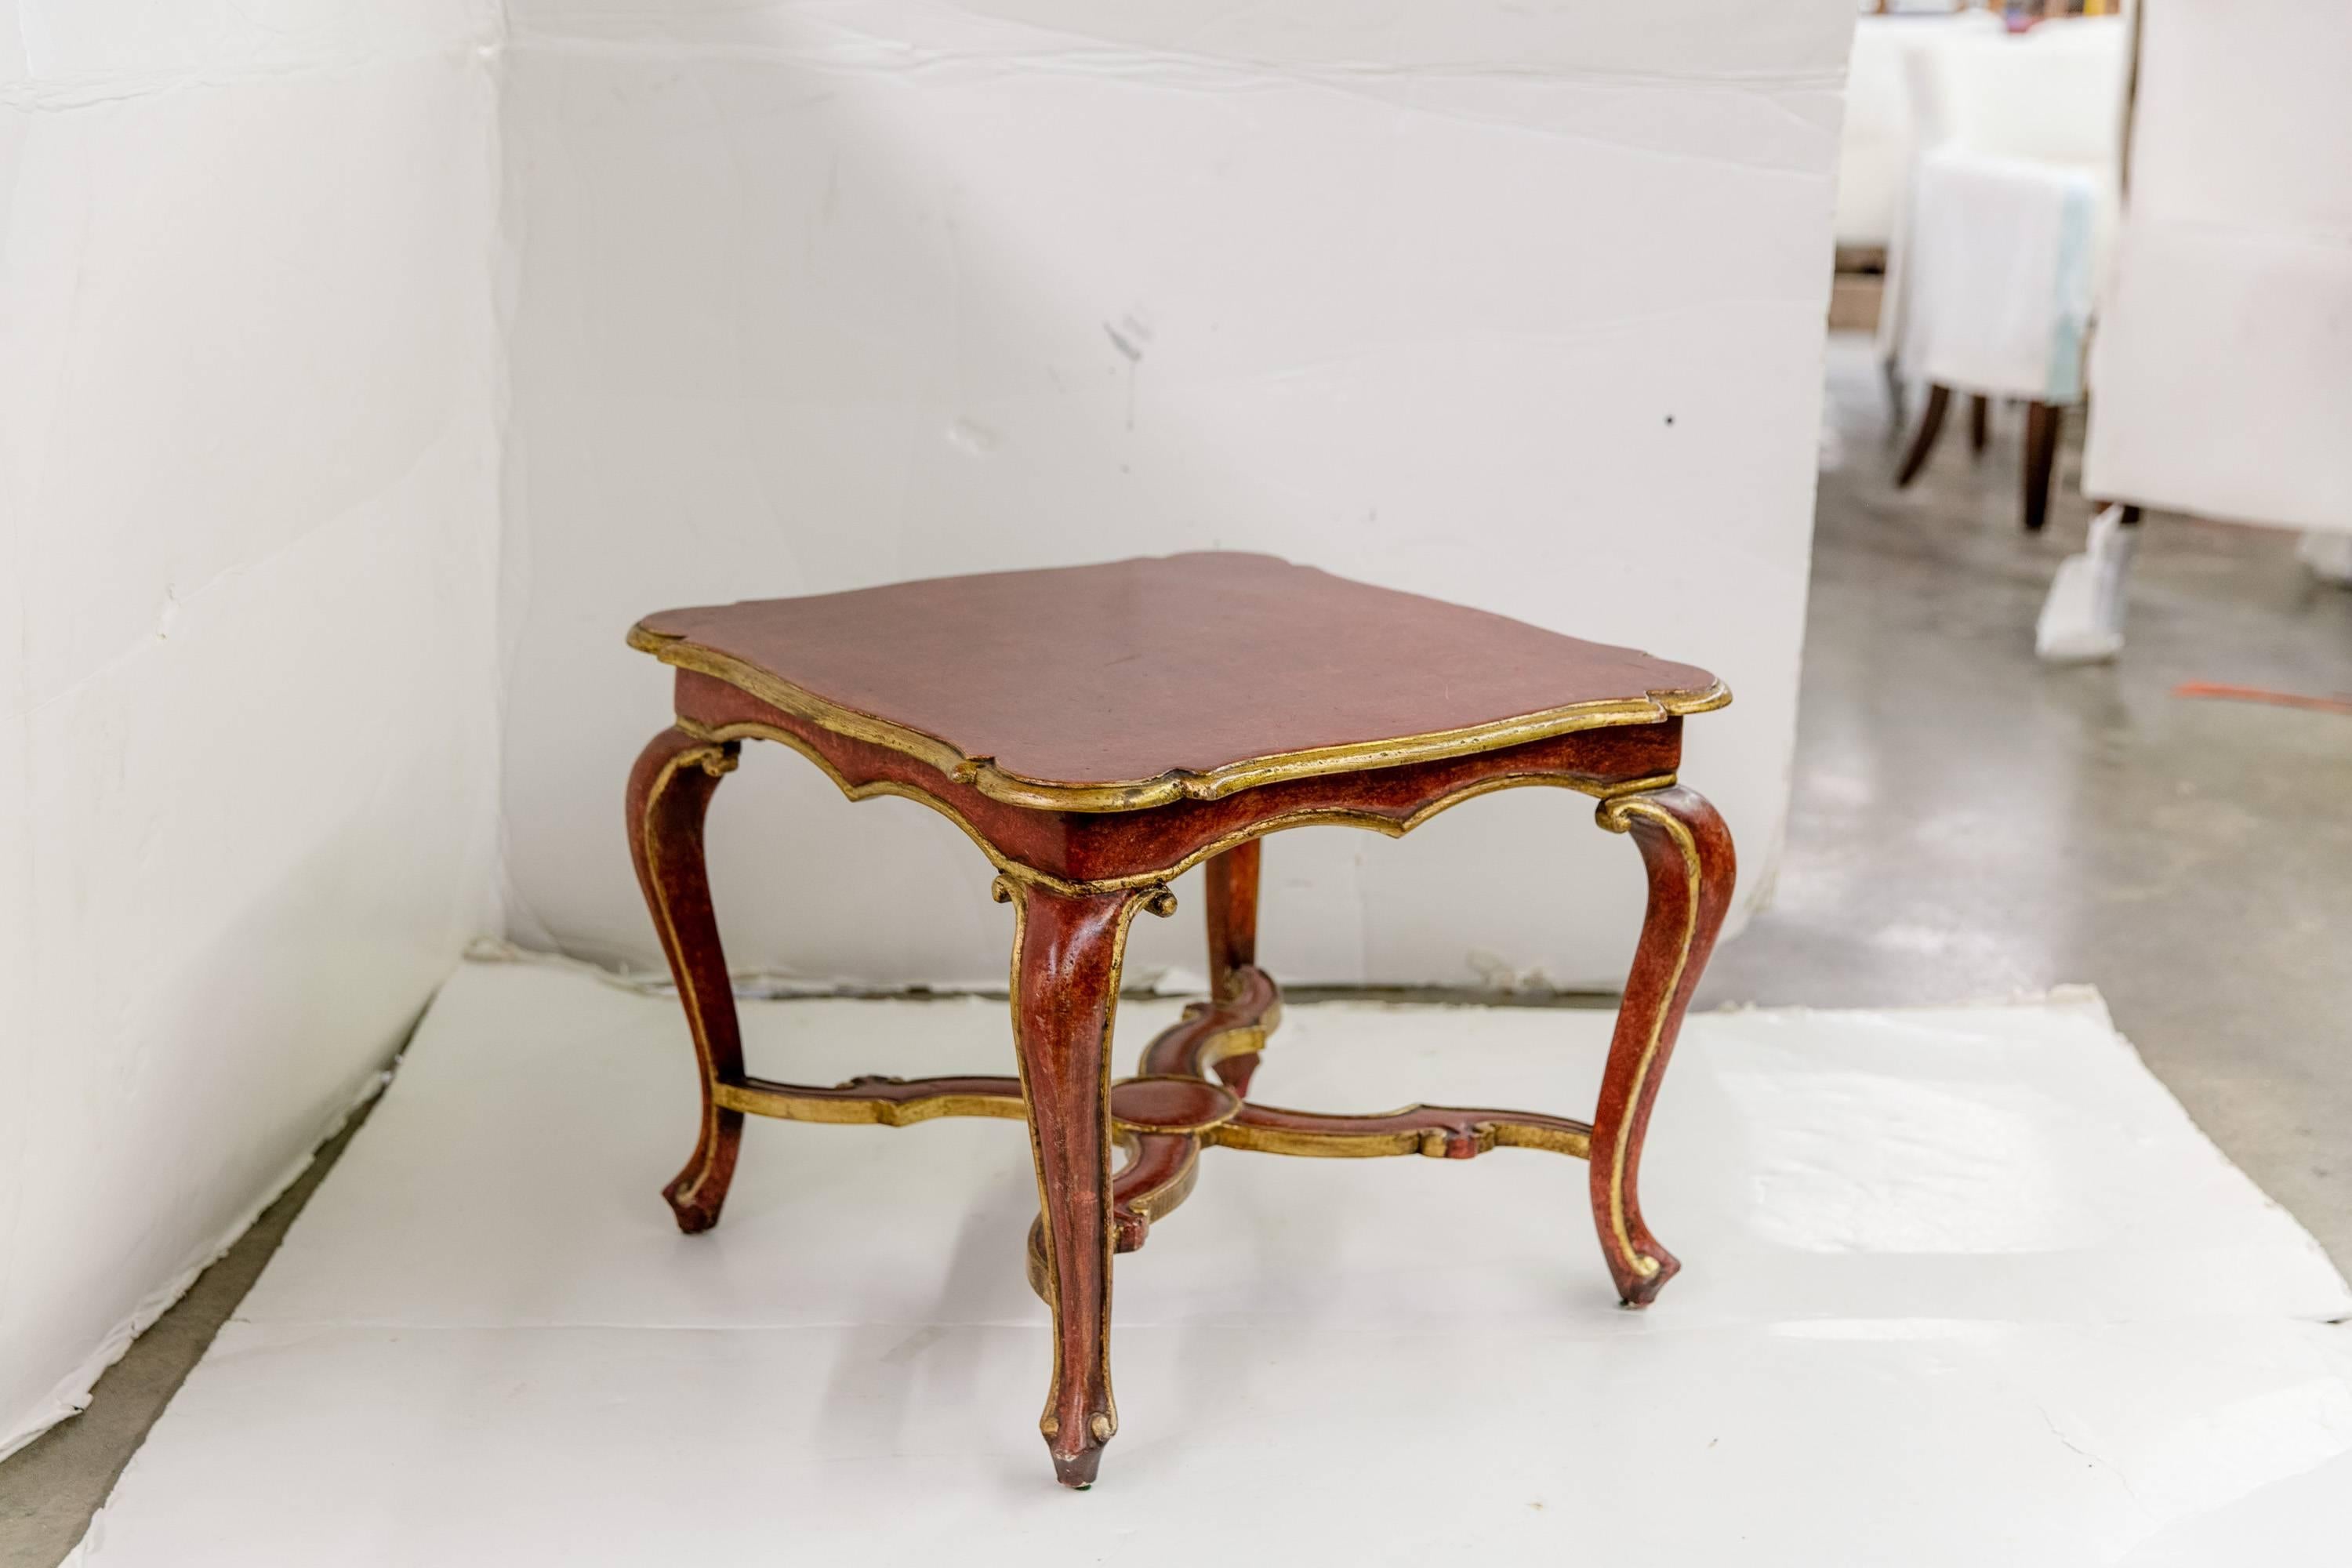 Vintage red-and-gilt Venetian side table with a distressed finish.